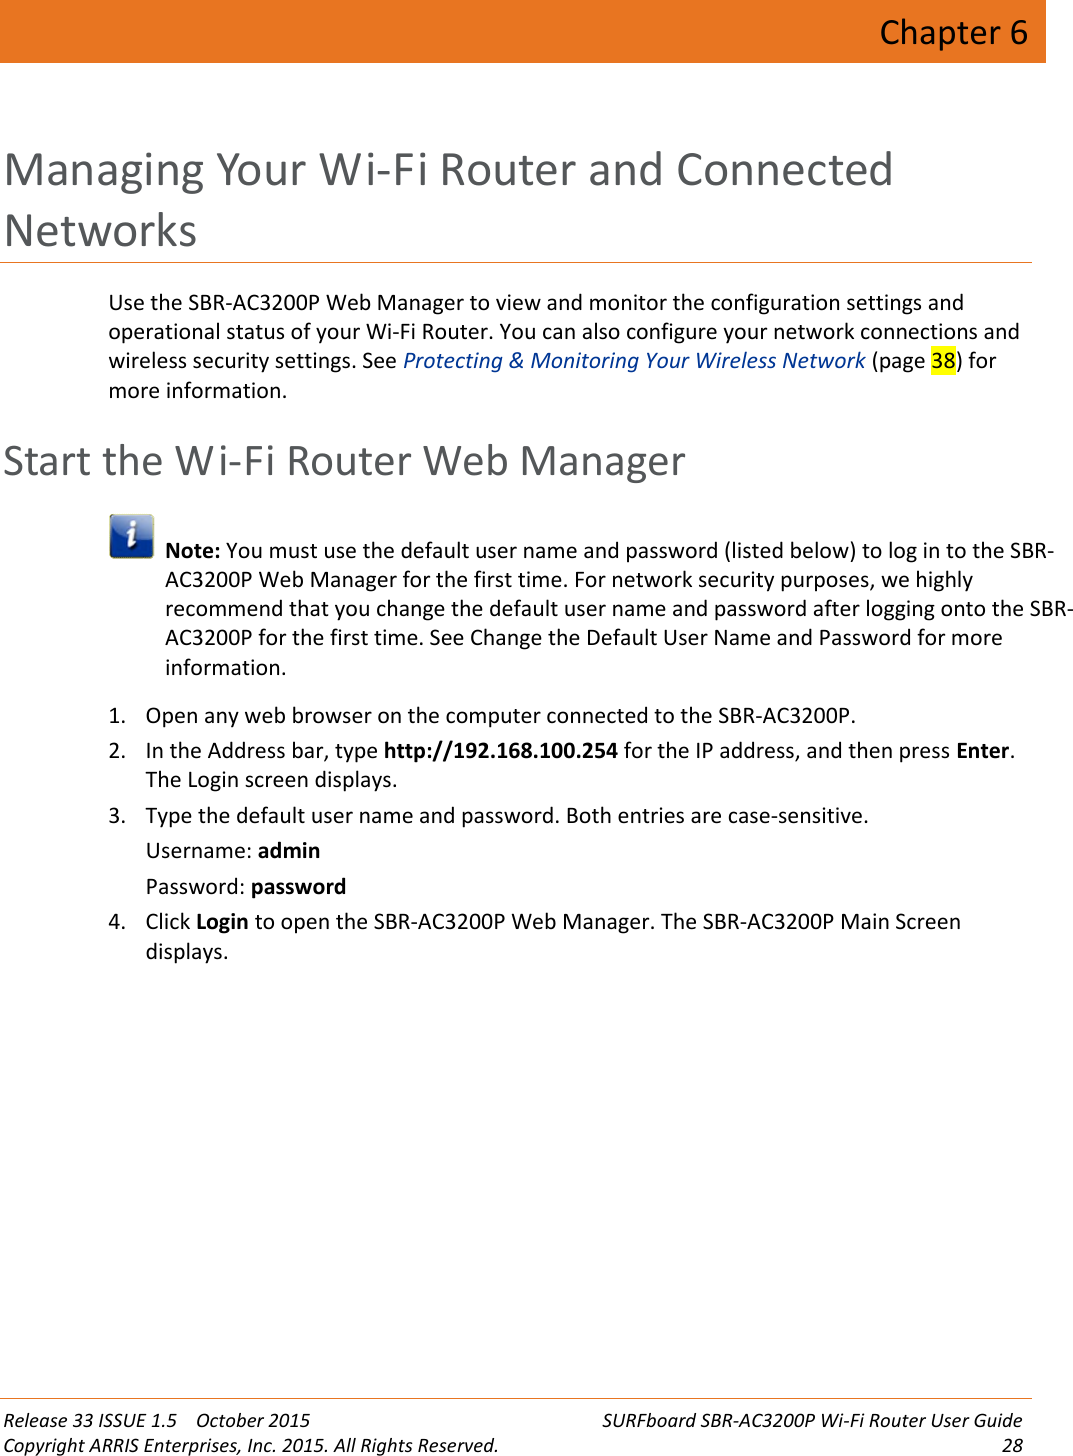 Release 33 ISSUE 1.5 October 2015 SURFboard SBR-AC3200P Wi-Fi Router User GuideCopyright ARRIS Enterprises, Inc. 2015. All Rights Reserved. 28Chapter 6Managing Your Wi-Fi Router and ConnectedNetworksUse the SBR-AC3200P Web Manager to view and monitor the configuration settings andoperational status of your Wi-Fi Router. You can also configure your network connections andwireless security settings. See Protecting &amp; Monitoring Your Wireless Network (page 38) formore information.Start the Wi-Fi Router Web ManagerNote: You must use the default user name and password (listed below) to log in to the SBR-AC3200P Web Manager for the first time. For network security purposes, we highlyrecommend that you change the default user name and password after logging onto the SBR-AC3200P for the first time. See Change the Default User Name and Password for moreinformation.1. Open any web browser on the computer connected to the SBR-AC3200P.2. In the Address bar, type http://192.168.100.254 for the IP address, and then press Enter.The Login screen displays.3. Type the default user name and password. Both entries are case-sensitive.Username: adminPassword: password4. Click Login to open the SBR-AC3200P Web Manager. The SBR-AC3200P Main Screendisplays.